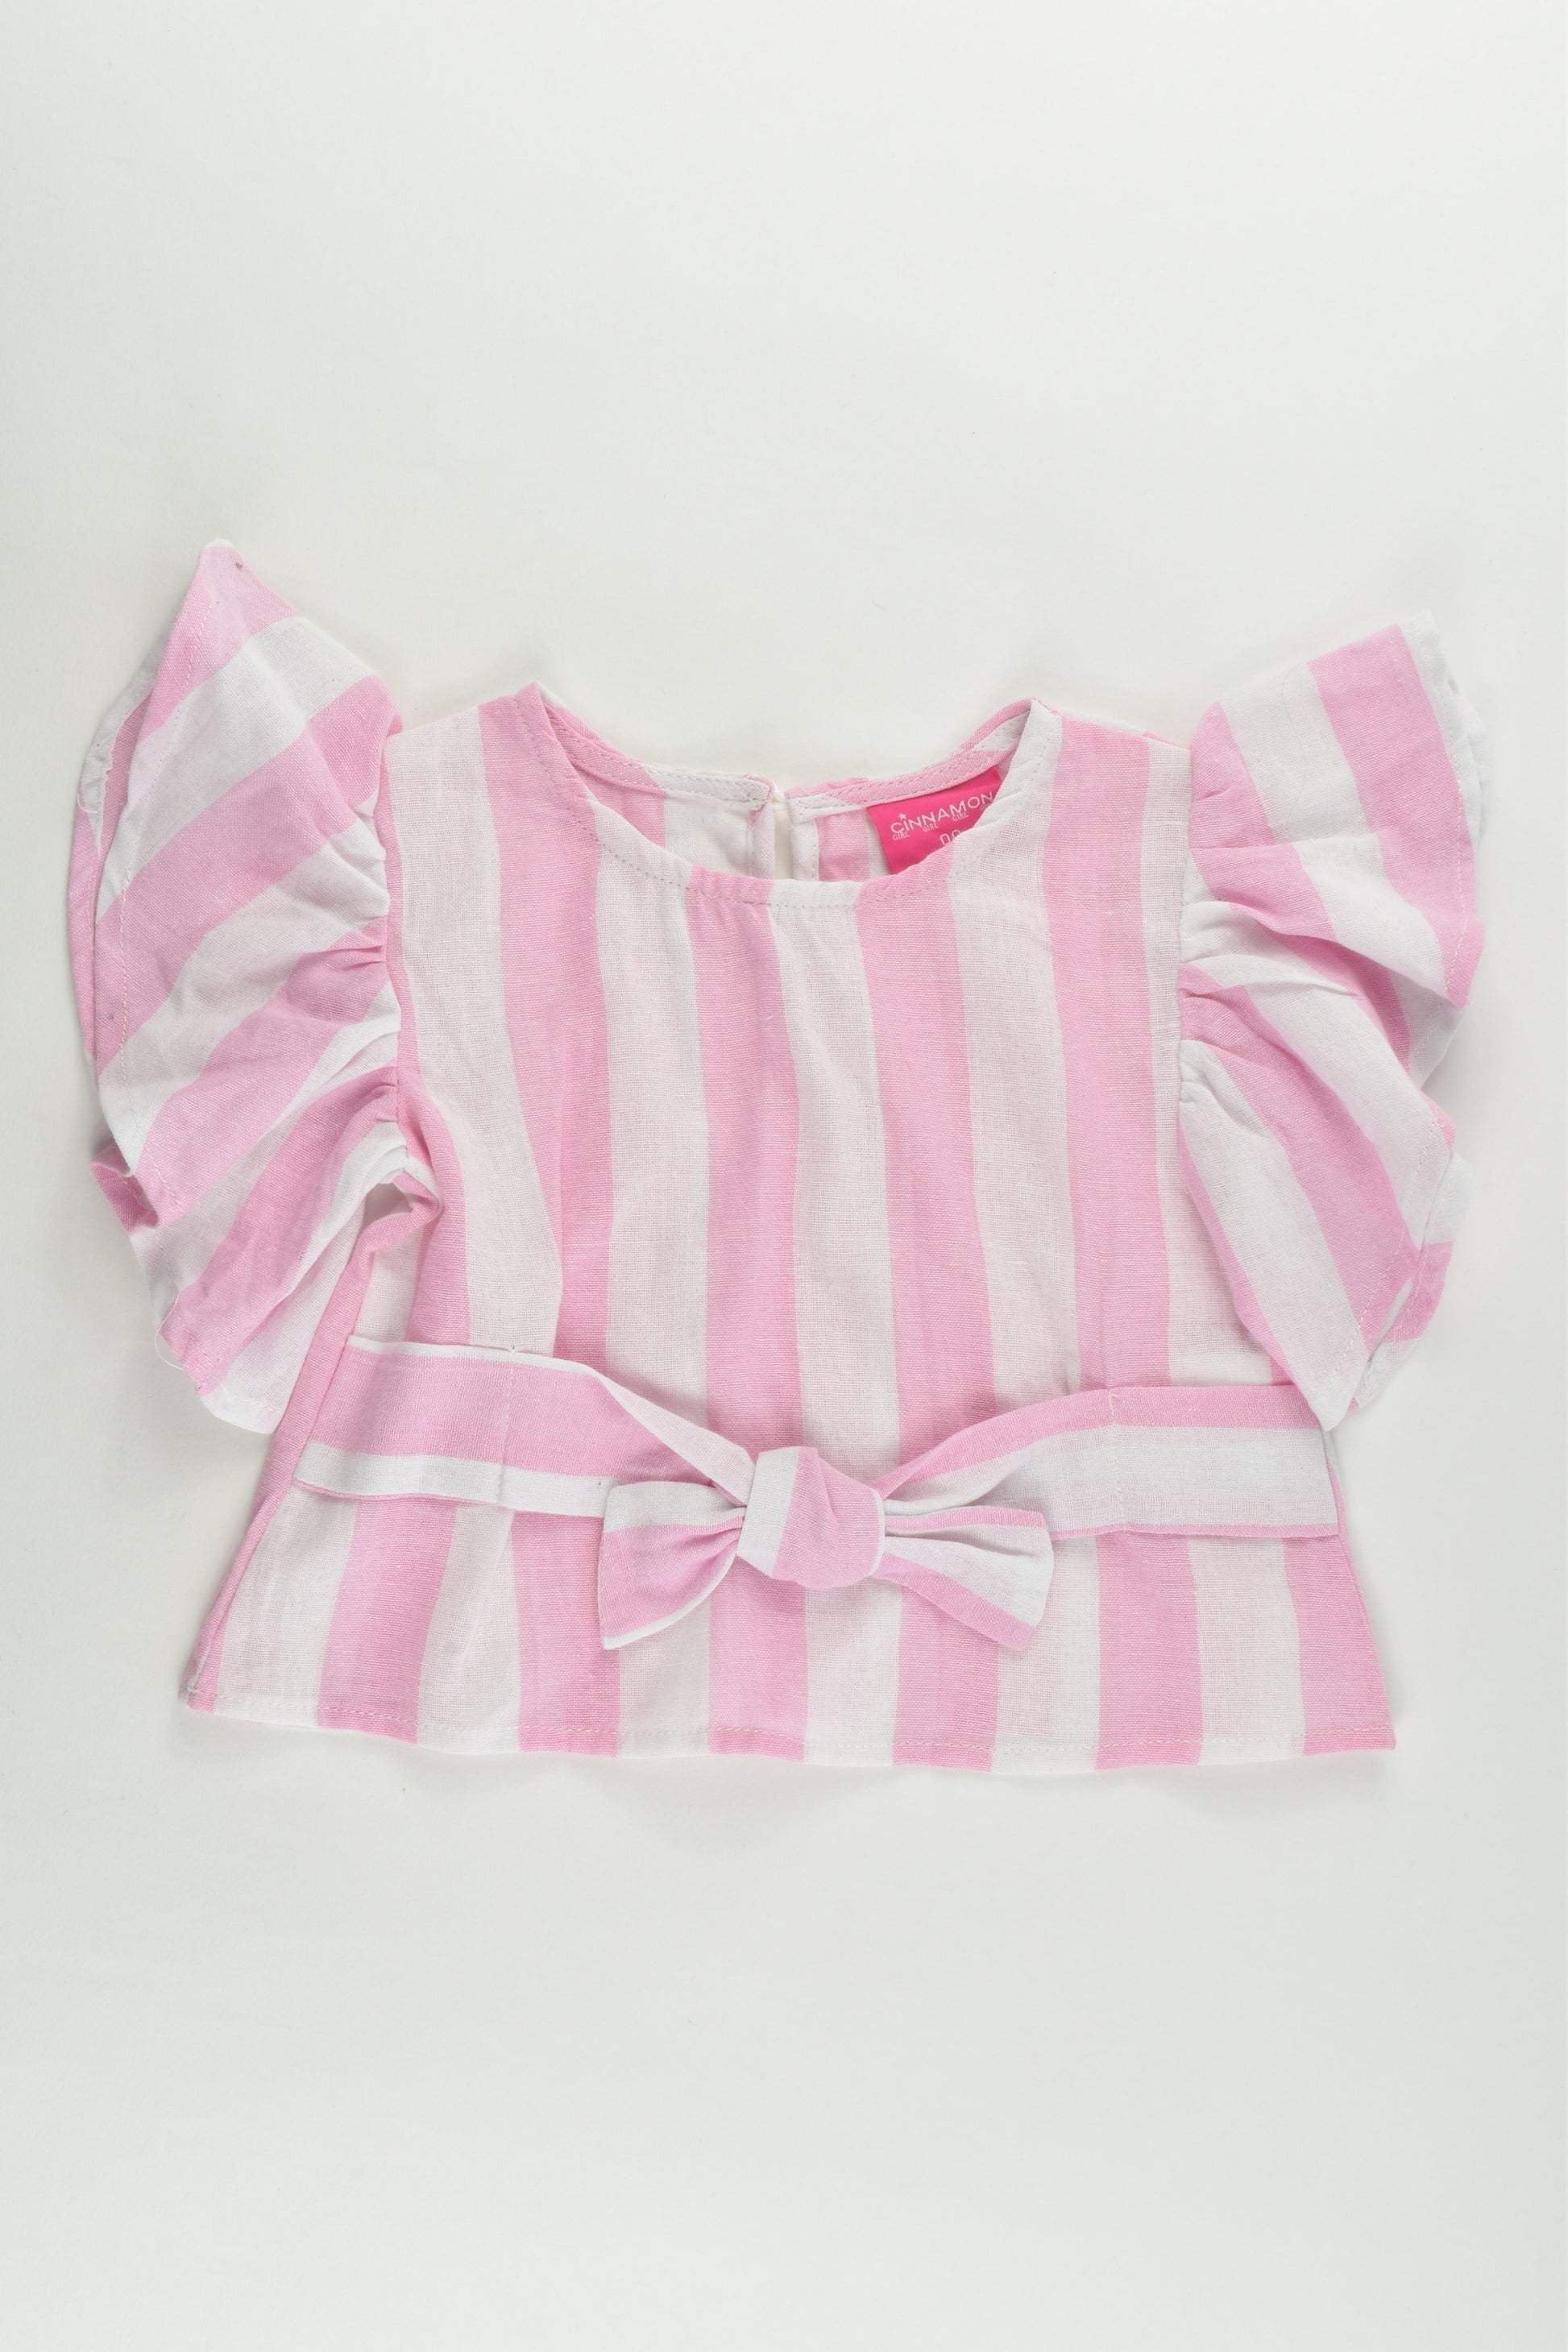 NEW Cinnamon Girl Size 00 Pink Stripes Top